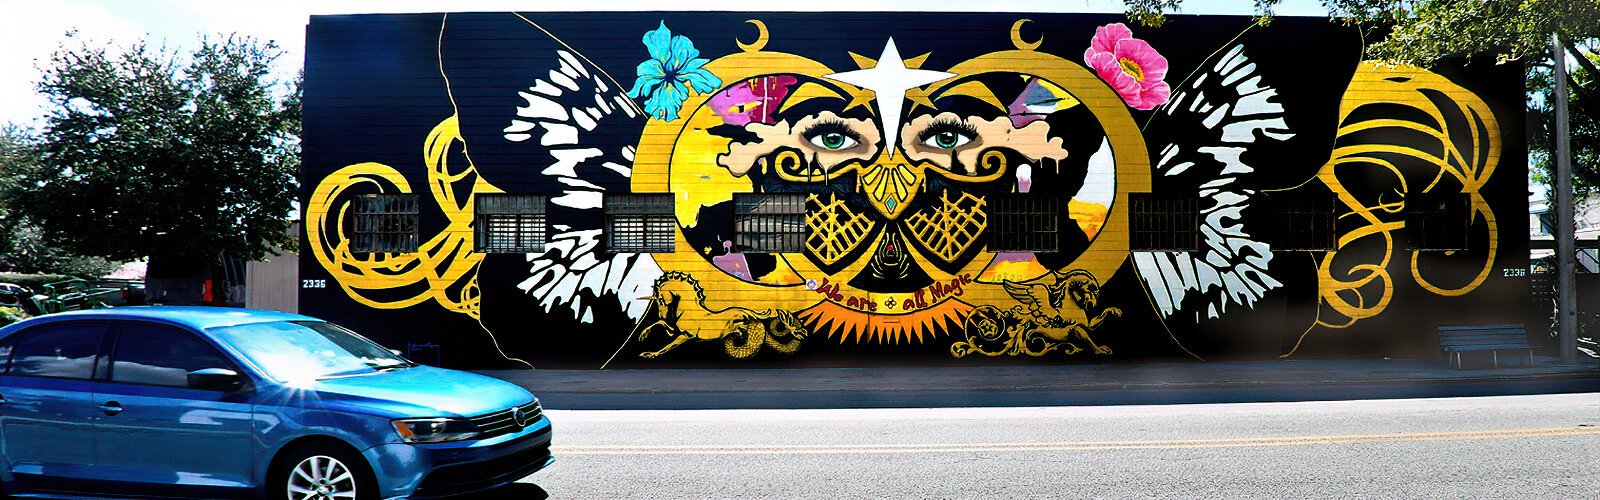 St Petersburg-based muralist Sarah Sheppard added another intricate mural to her St Petersburg collection for the 2023 edition of the annual SHINE Mural Festival.